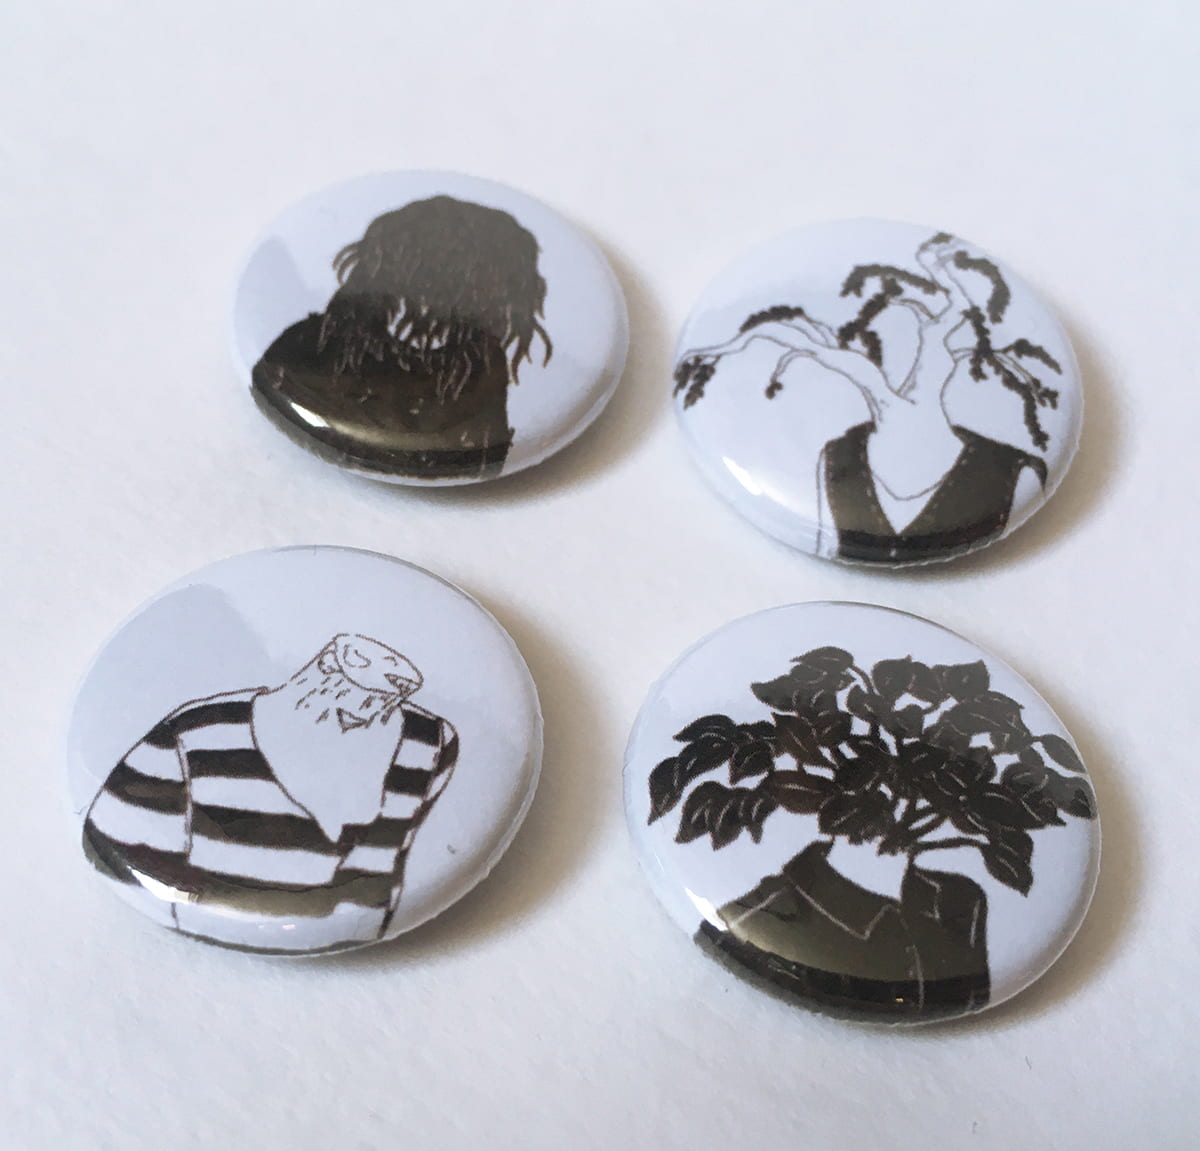 Image of pin badges created to sell on my online store.